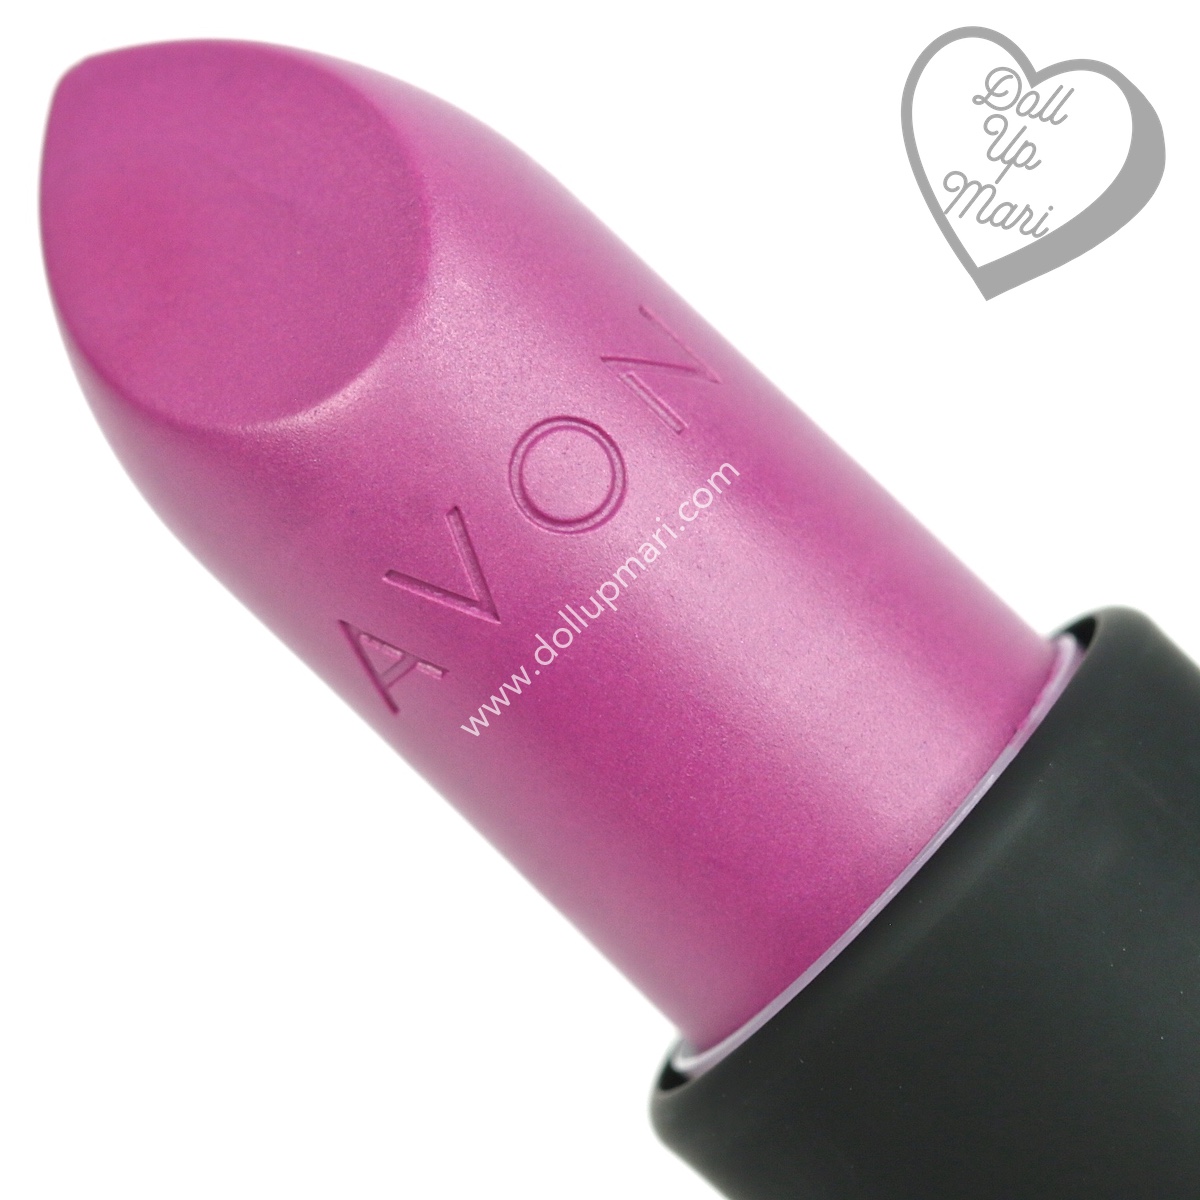 zoom in of Hot Plum shade of AVON Perfectly Matte Lipstick